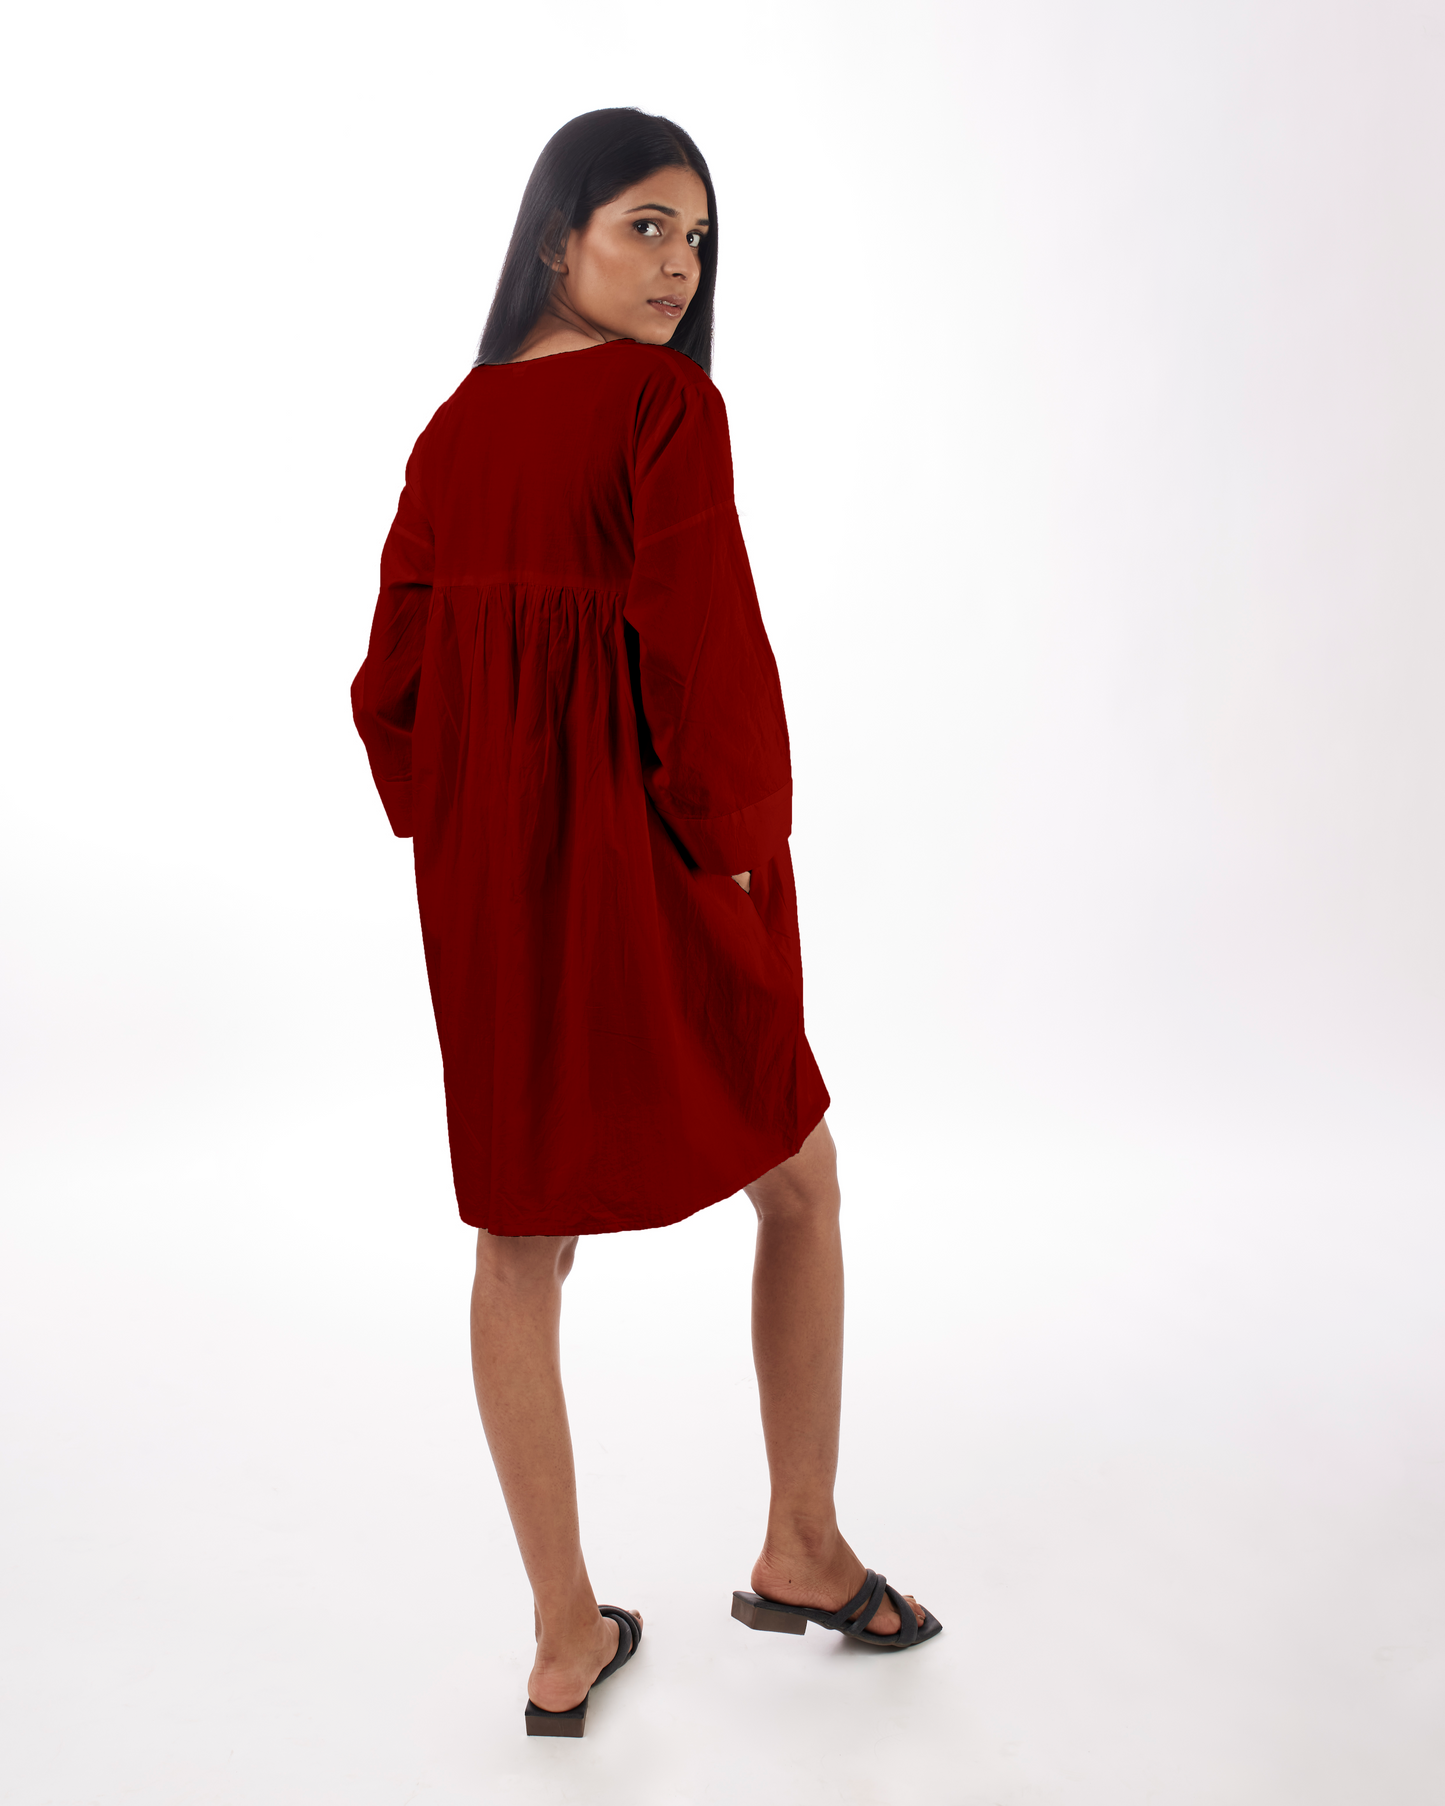 Red Yoke Mini Dress at Kamakhyaa by Kamakhyaa. This item is 100% pure cotton, Casual Wear, For Her, KKYSS, Mini Dresses, Natural, Red, Regular Fit, Summer Sutra, Womenswear